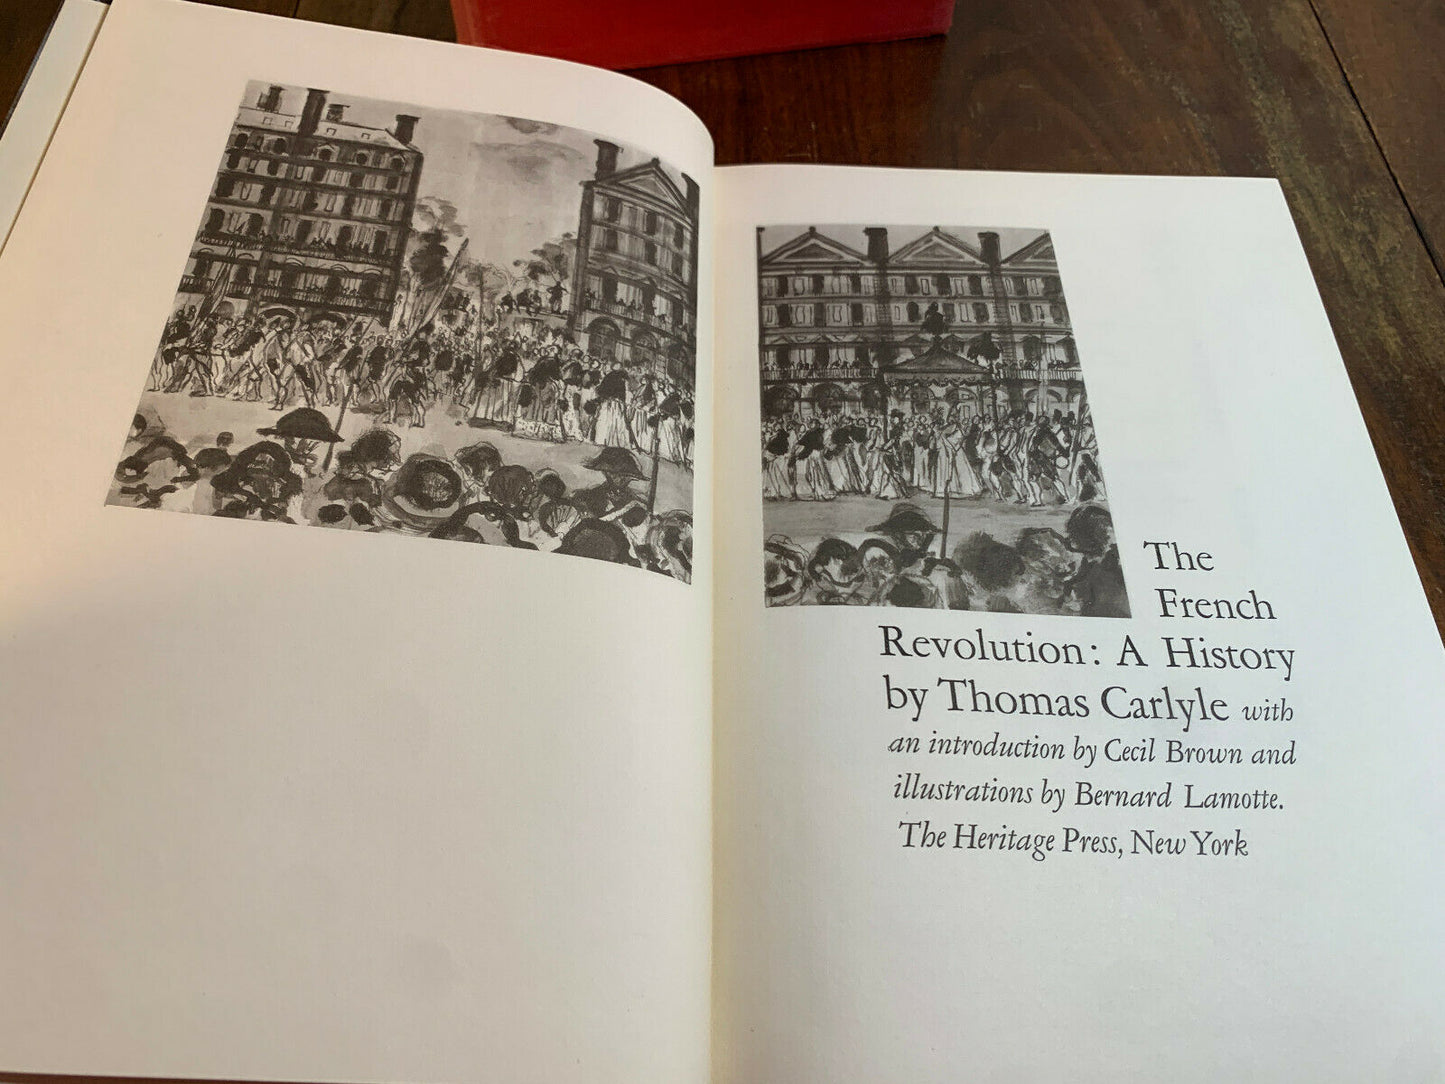 The French Revolution by Thomas Carlyle (1956 Heritage Illus HC with Slipcase)